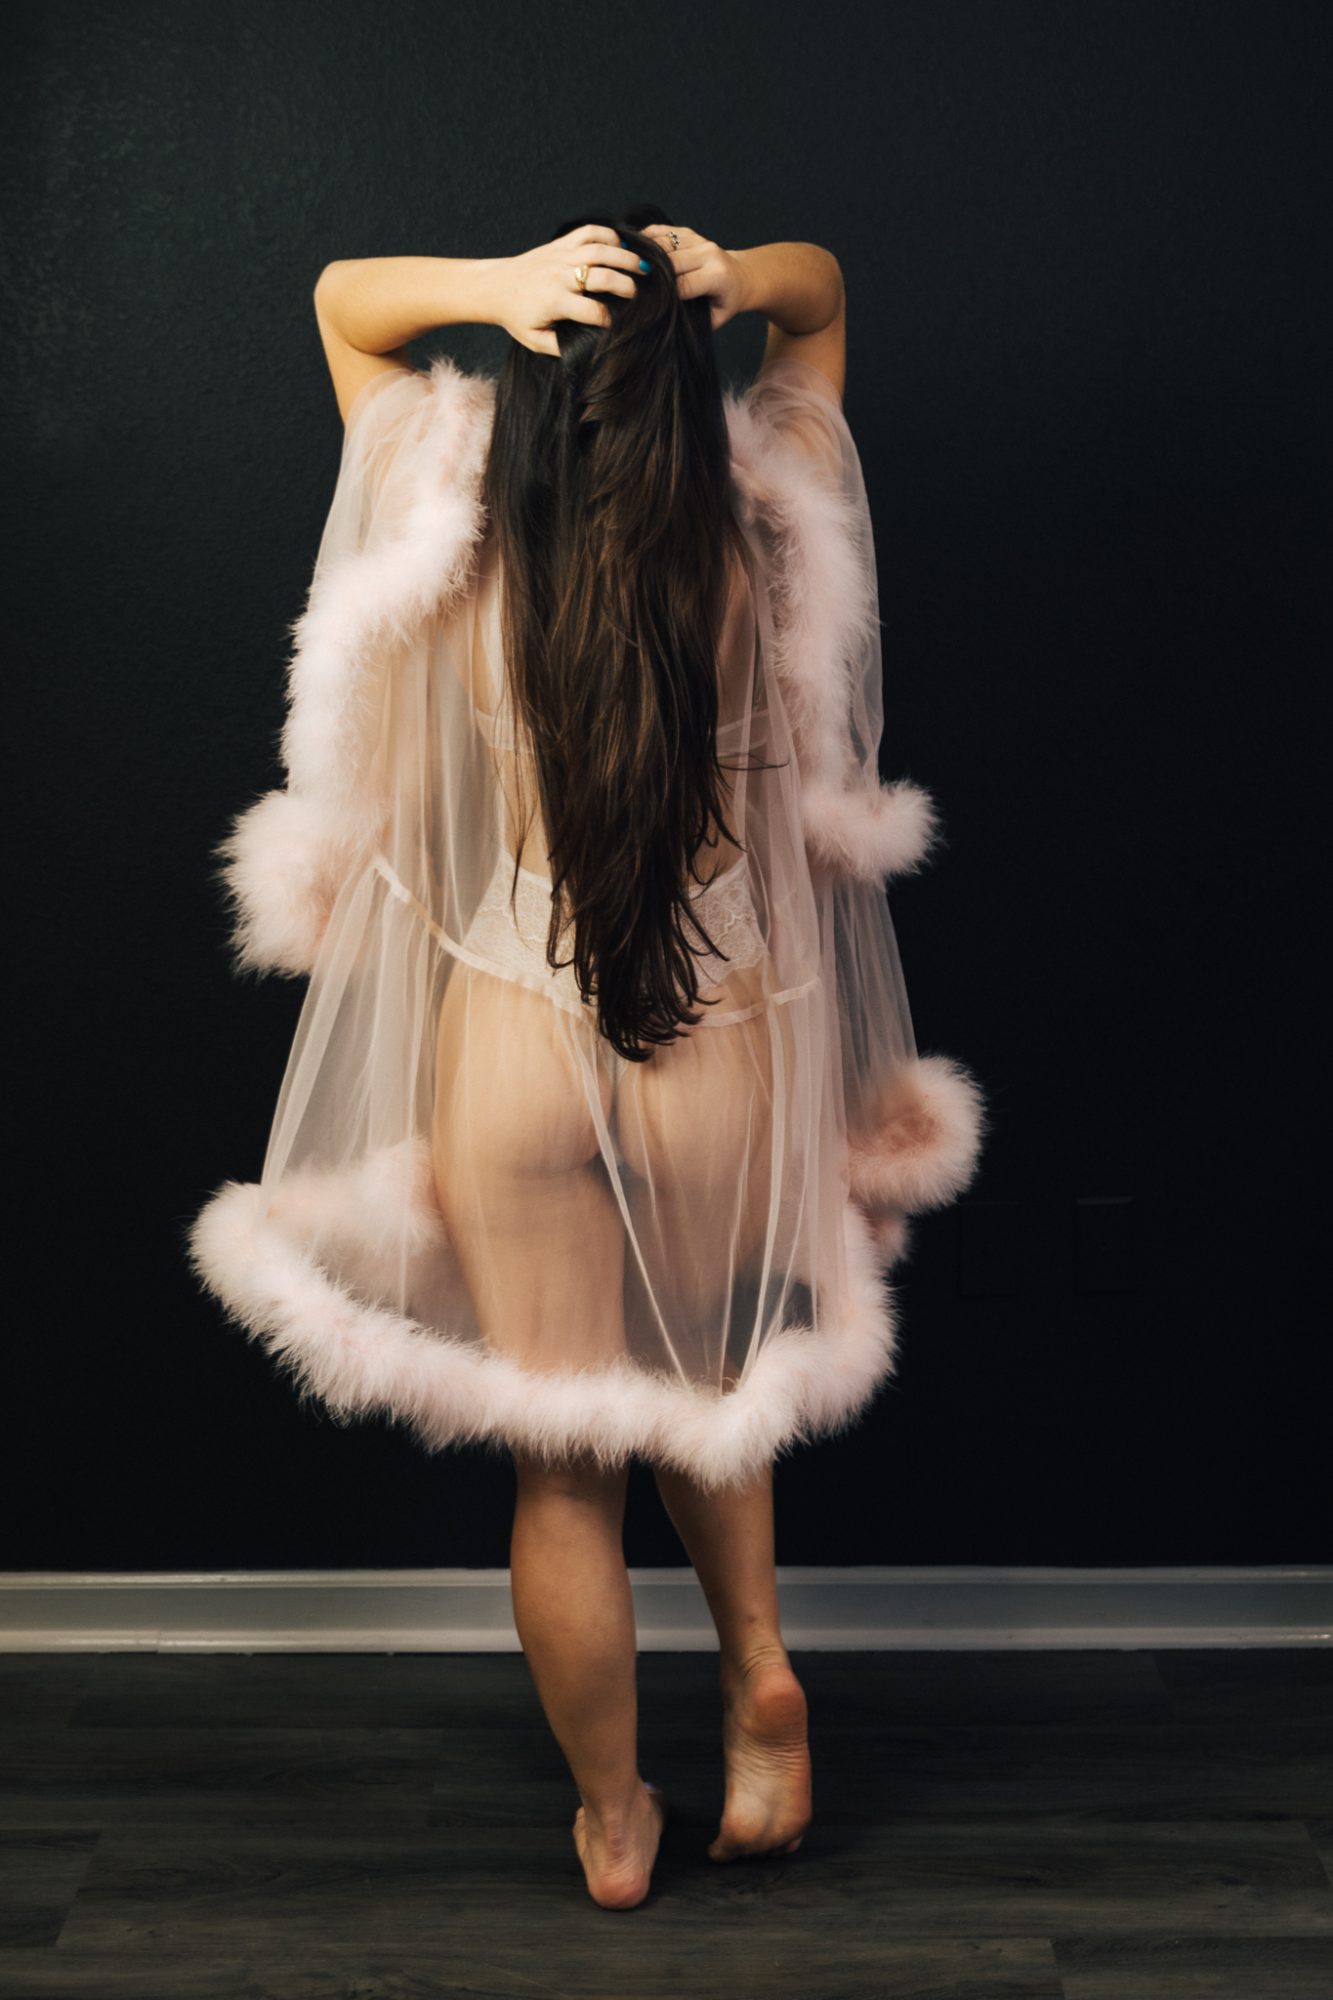 Back of a woman with hands on head wearing lacy lingerie under a sheer robe decorated in feathers for boudoir photos